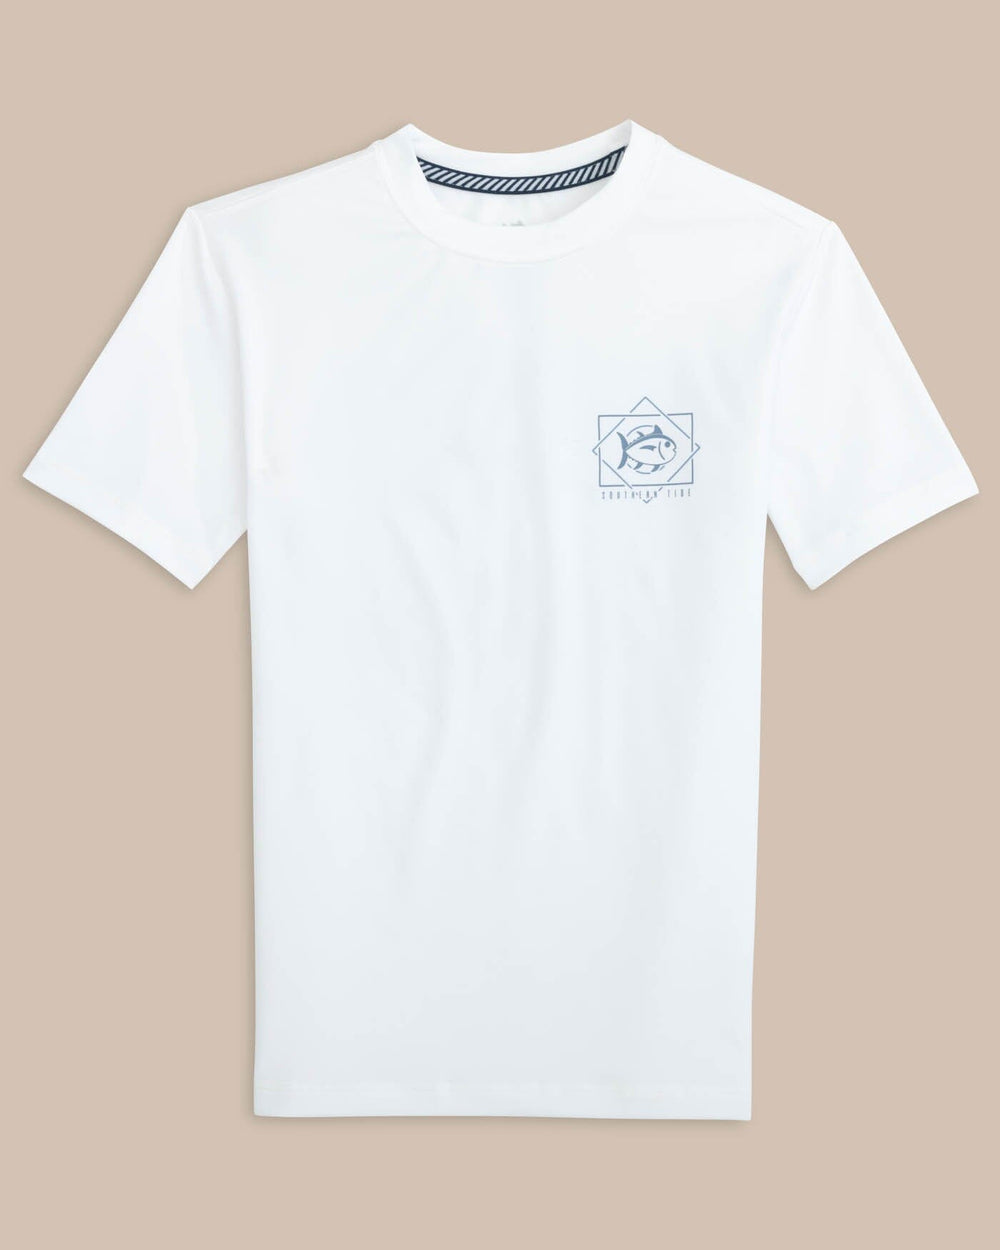 The front view of the Southern Tide Youth Geometric Striped Short Sleeve Performance T-Shirt by Southern Tide - Classic White